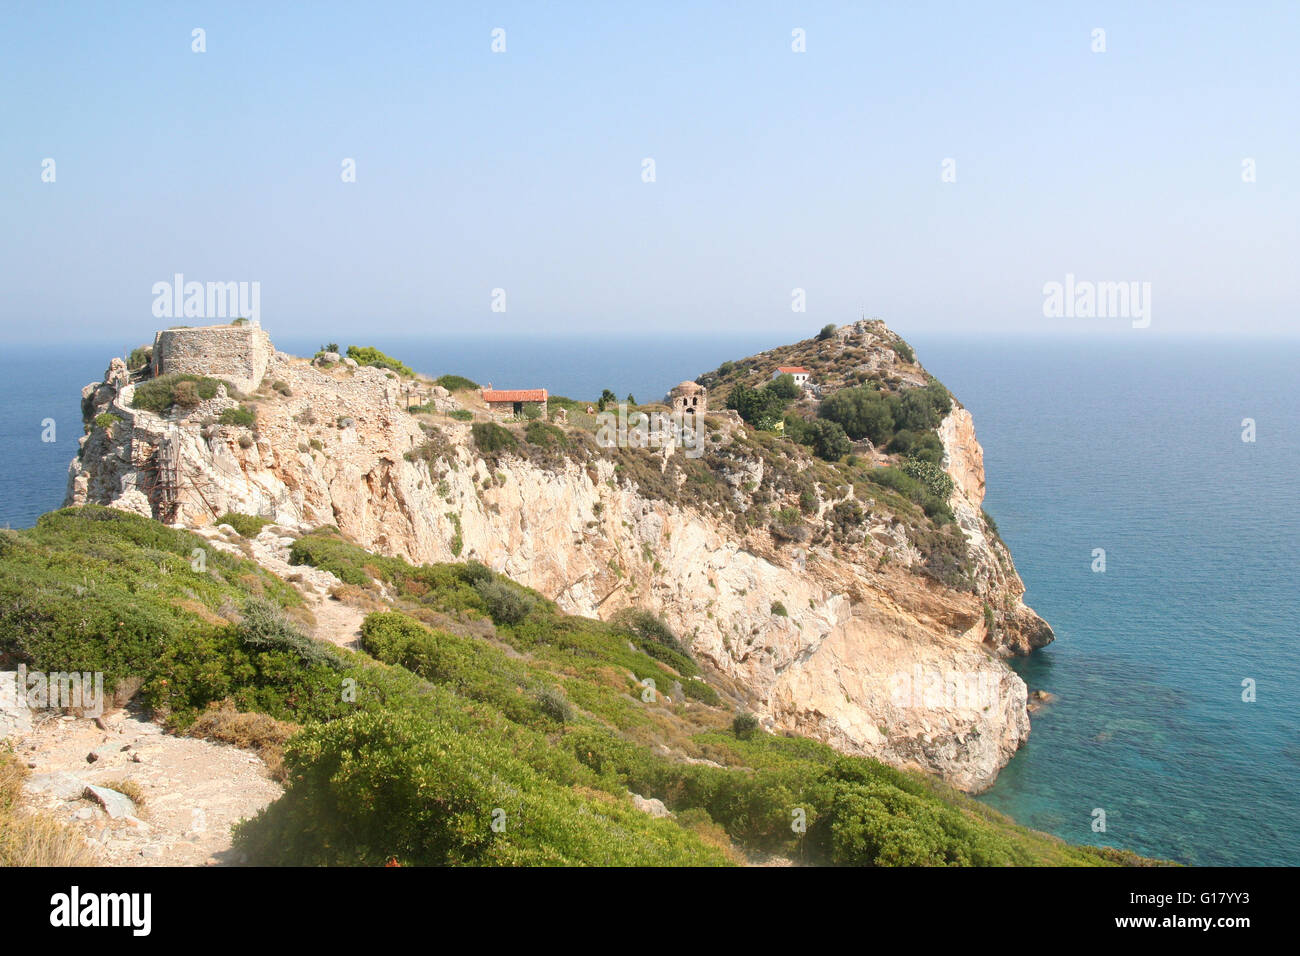 Abandoned site of Kastro, the former fortress Capital of Skiathos, Greece. Stock Photo